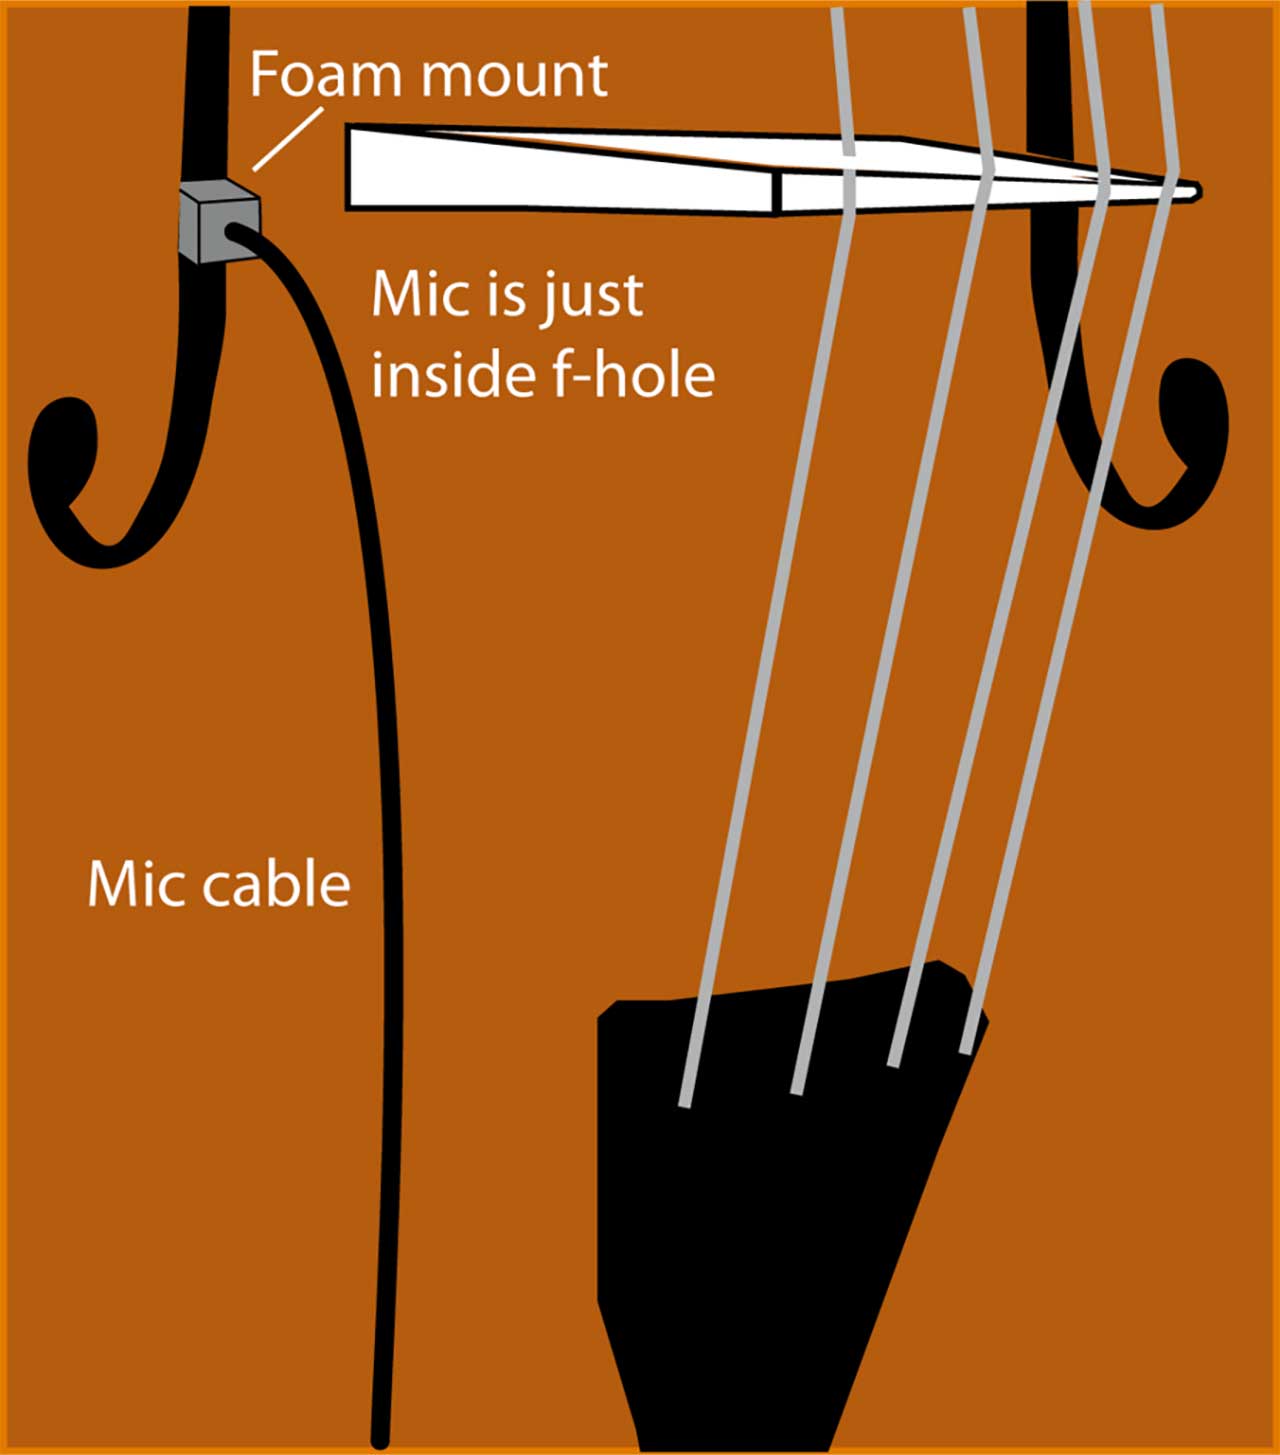 https://luthiers.com/wp-content/uploads/listing-uploads/images-gallery-50-photos-all-for/2020/11/Bartlett-audio-8-cello-mic-lb-for-loud-bands.jpg